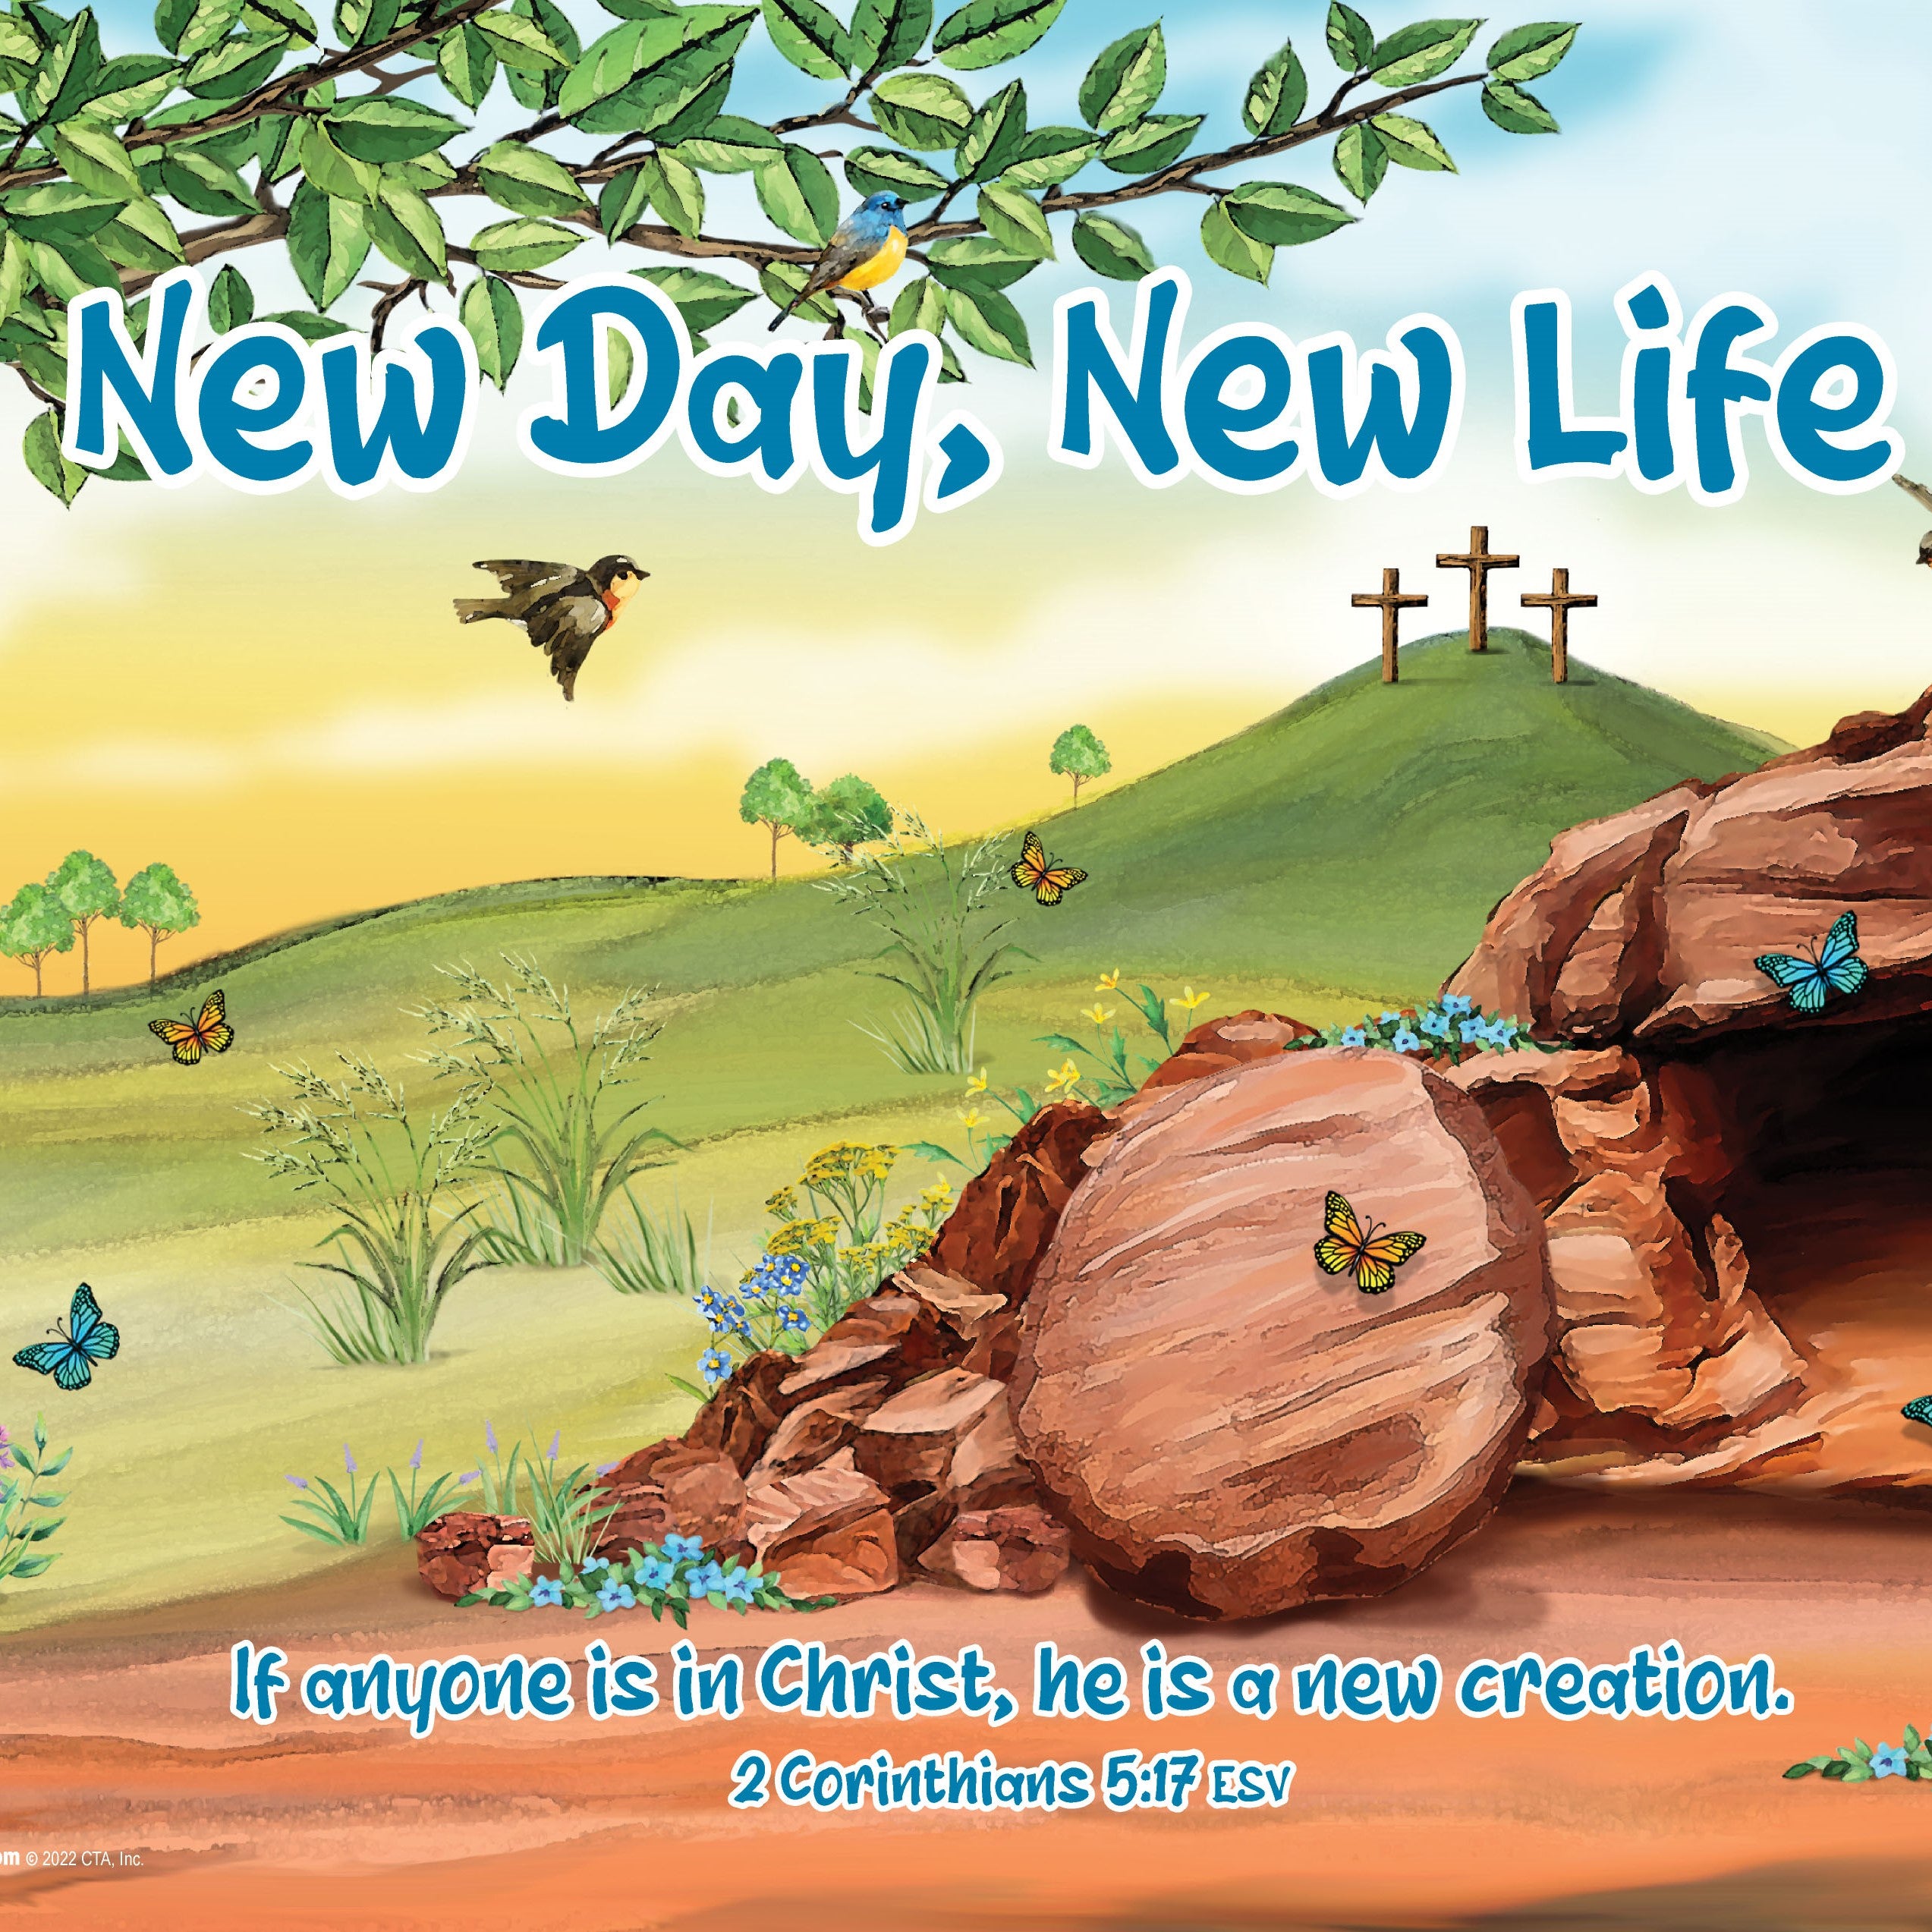 New Day New Life